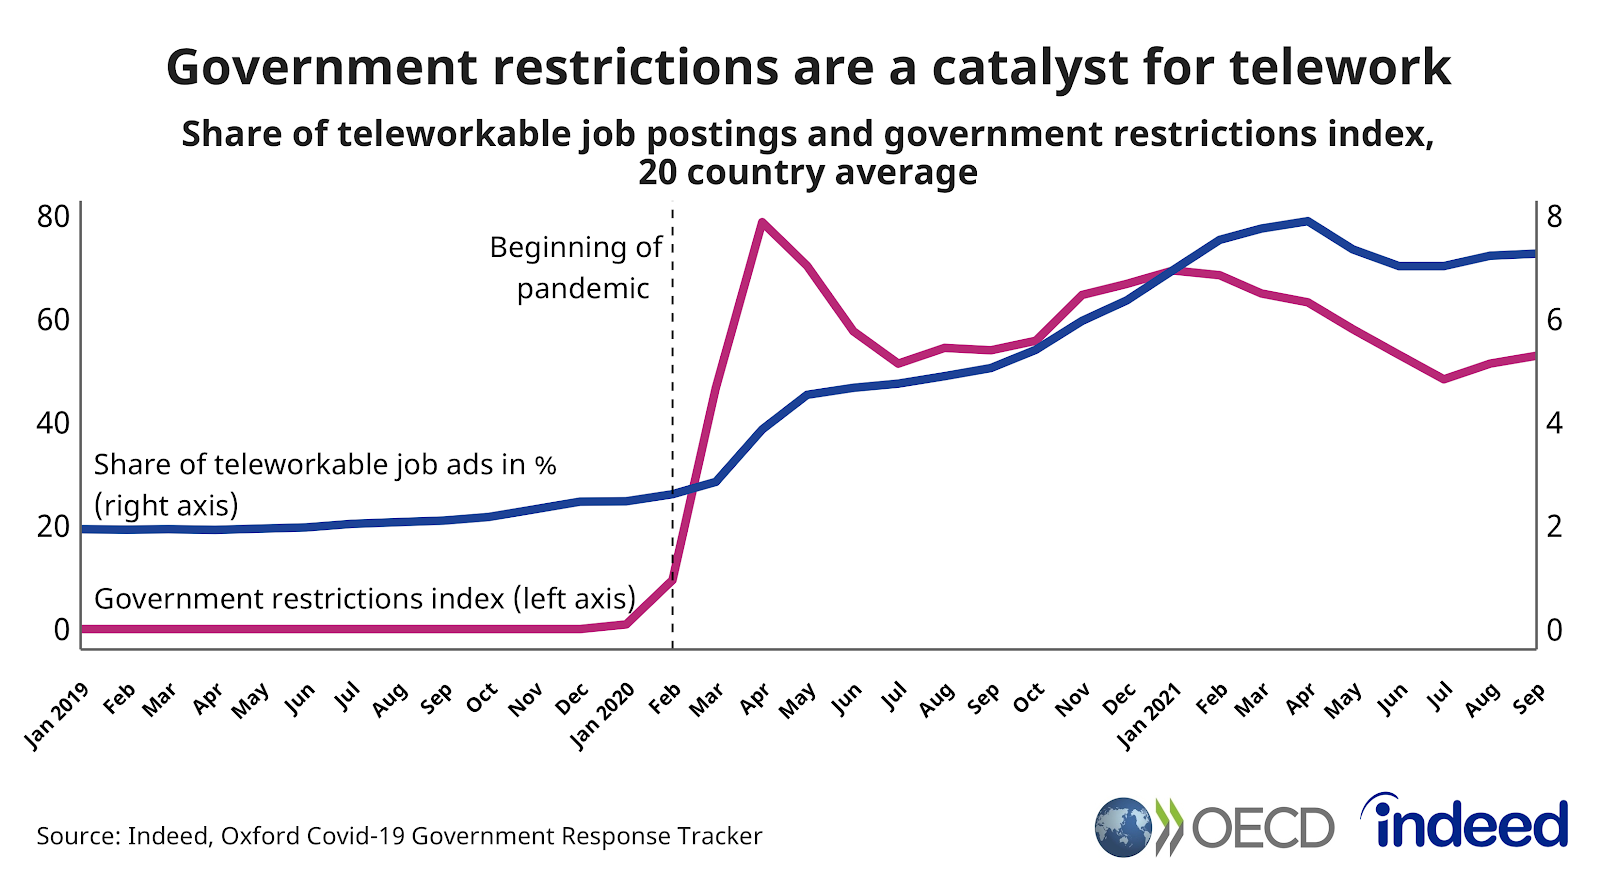 This line chart shows the share of teleworkable job postings in the total (scale ranging from 0 to 8%), and the intensity of mobility restrictions (on a scale from 0 to 80), from January 2019 to September 2021, on average for 20 OECD countries.